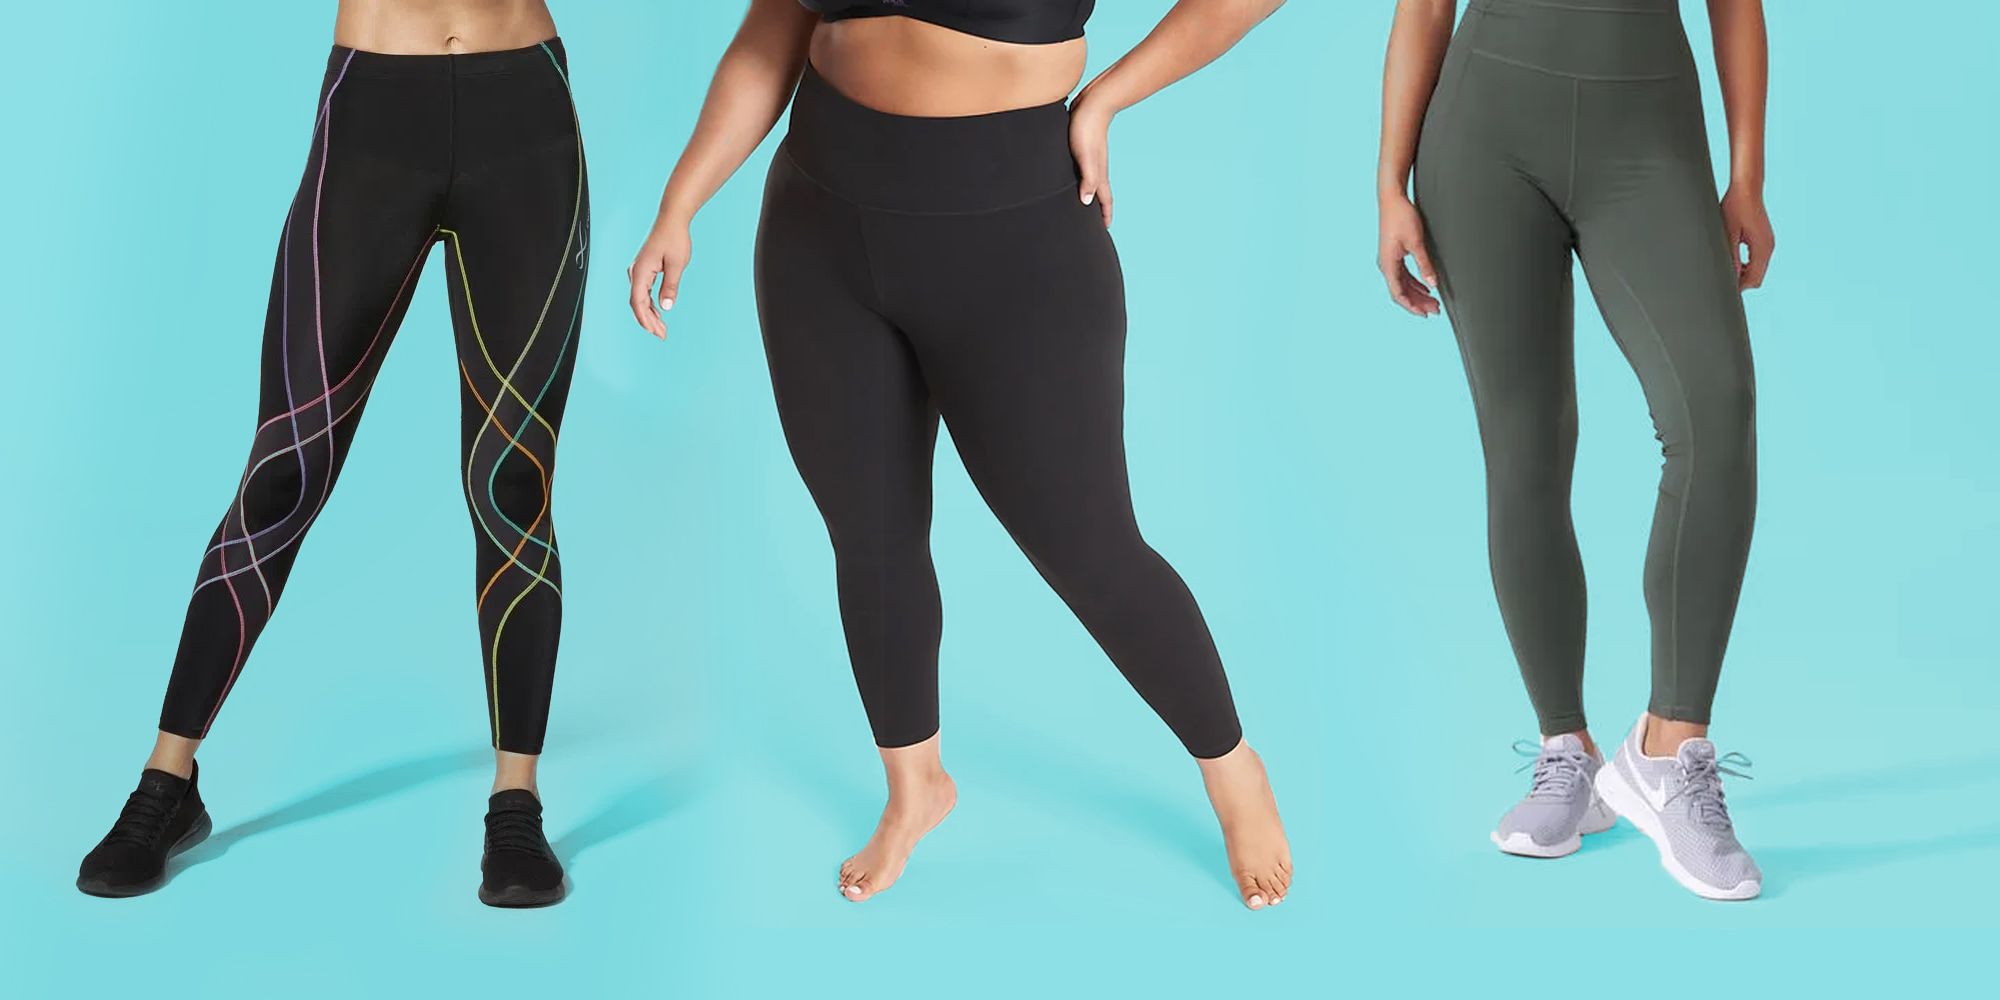 29 Best Workout Clothes for Women, According to Fitness Experts